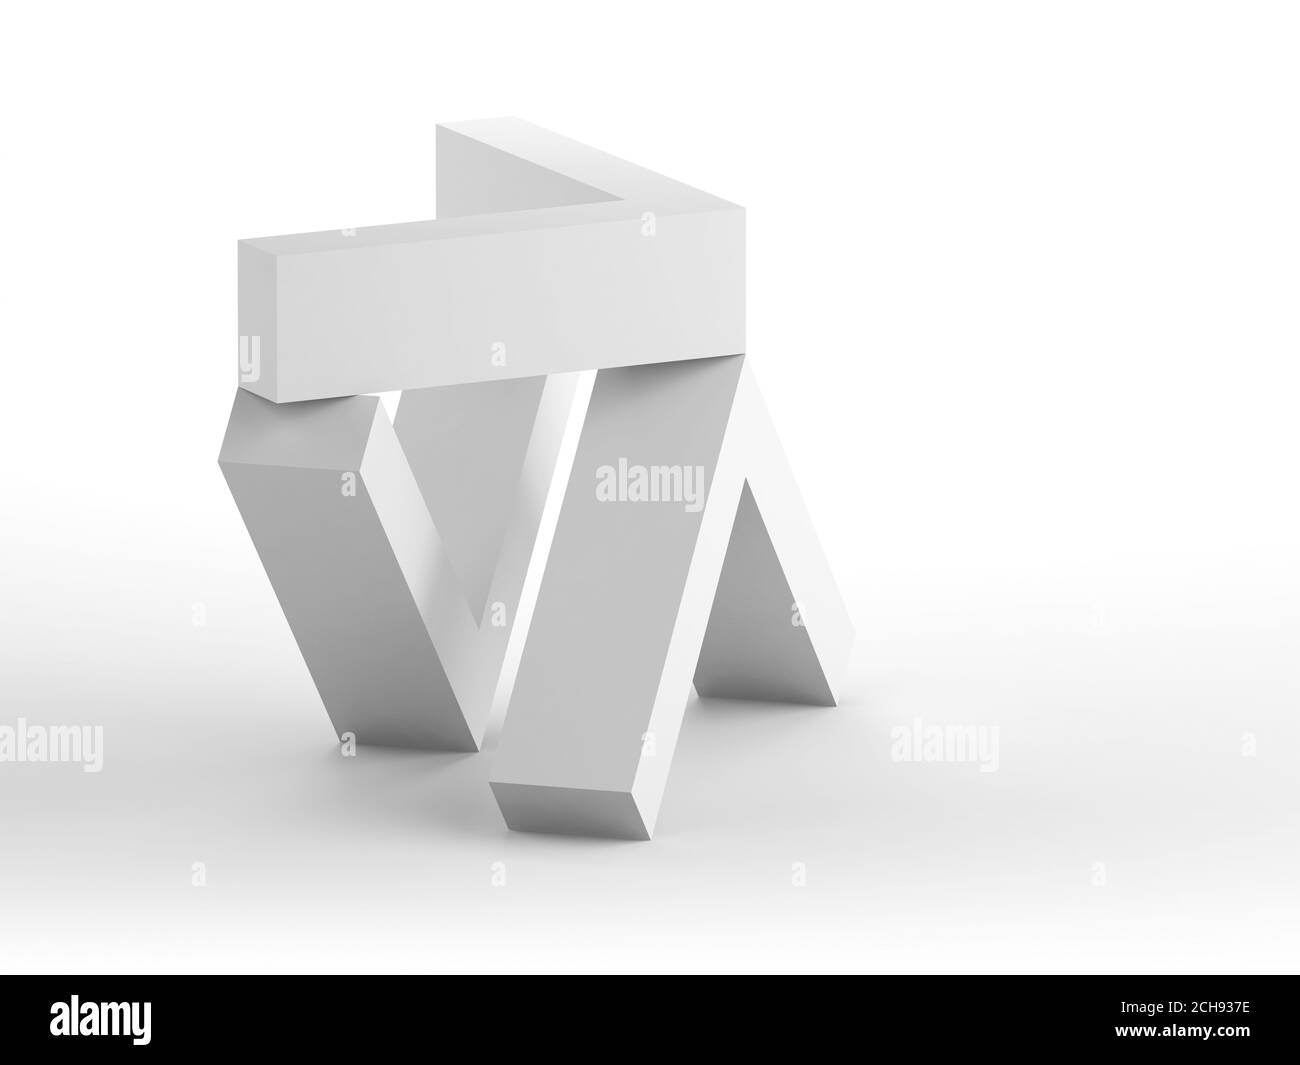 Abstract equilibrium still life installation with three corners standing on white background. 3d rendering illustration Stock Photo